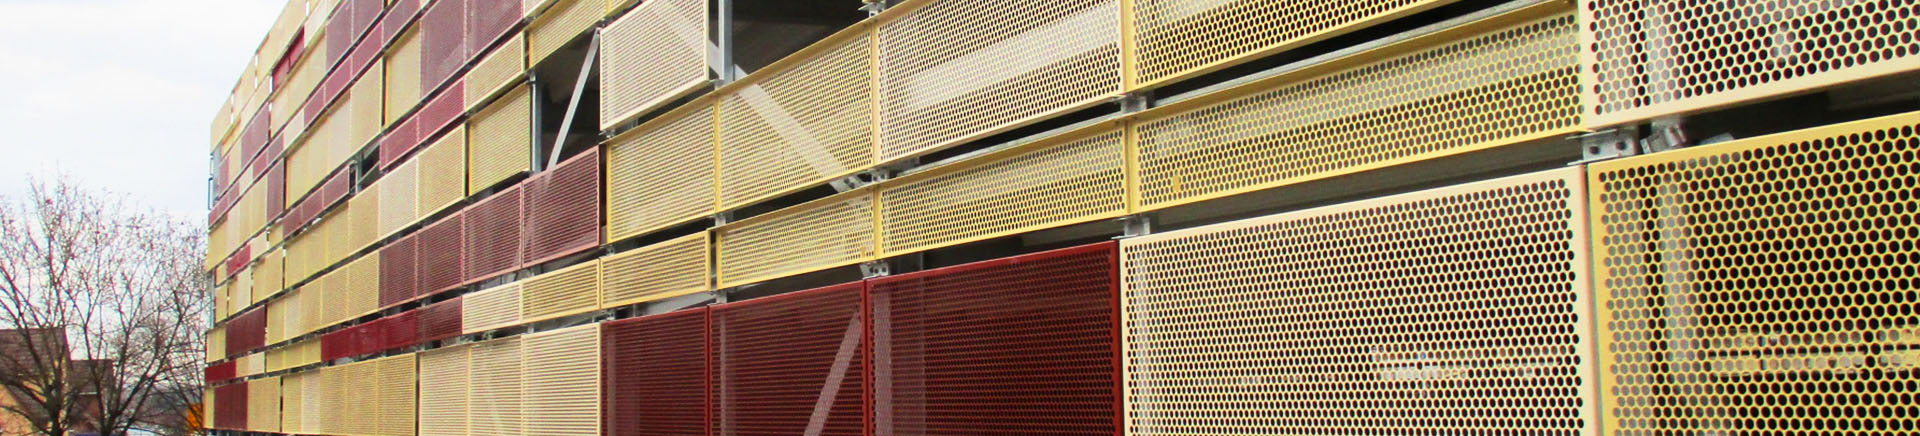 Perforated sheeting